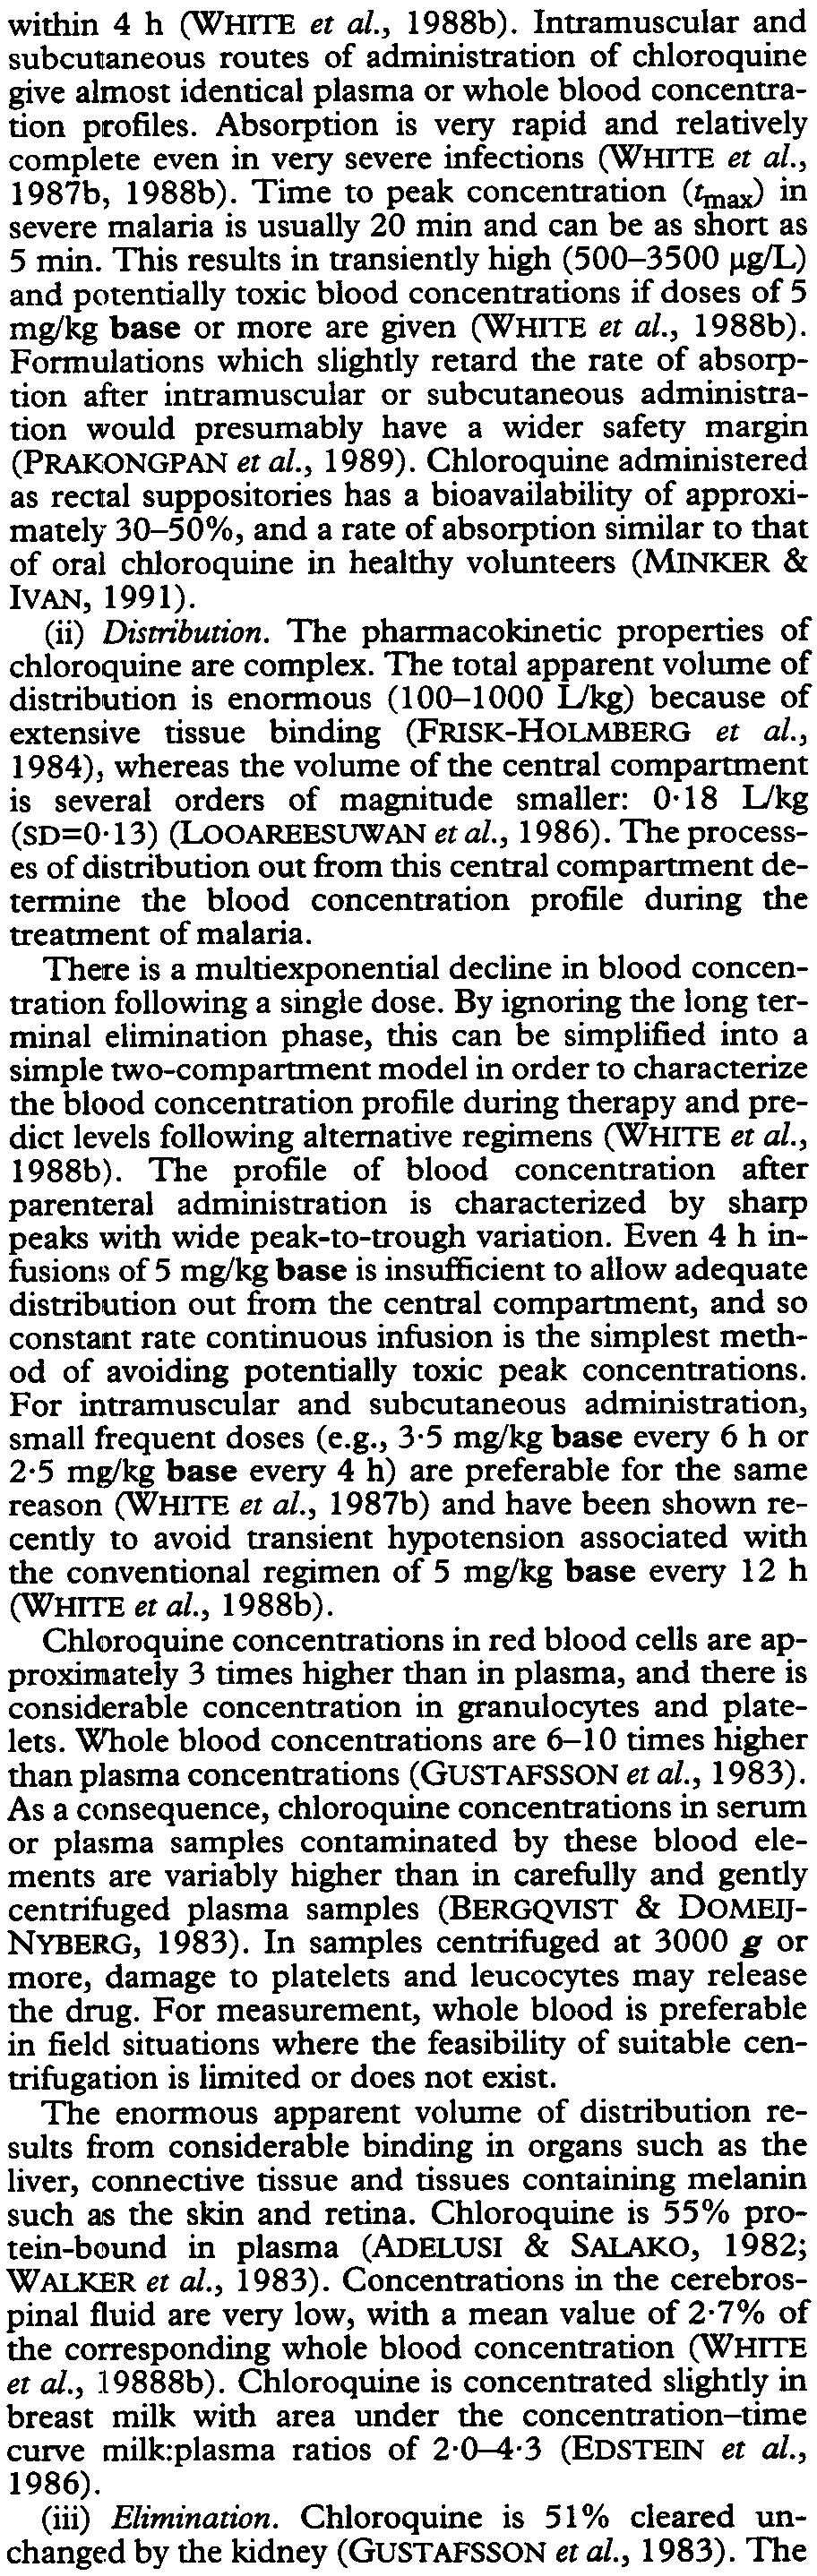 Absorption is very rapid and relatively complete even in very severe infections (WHn'E et at., 1987b, 1988b).